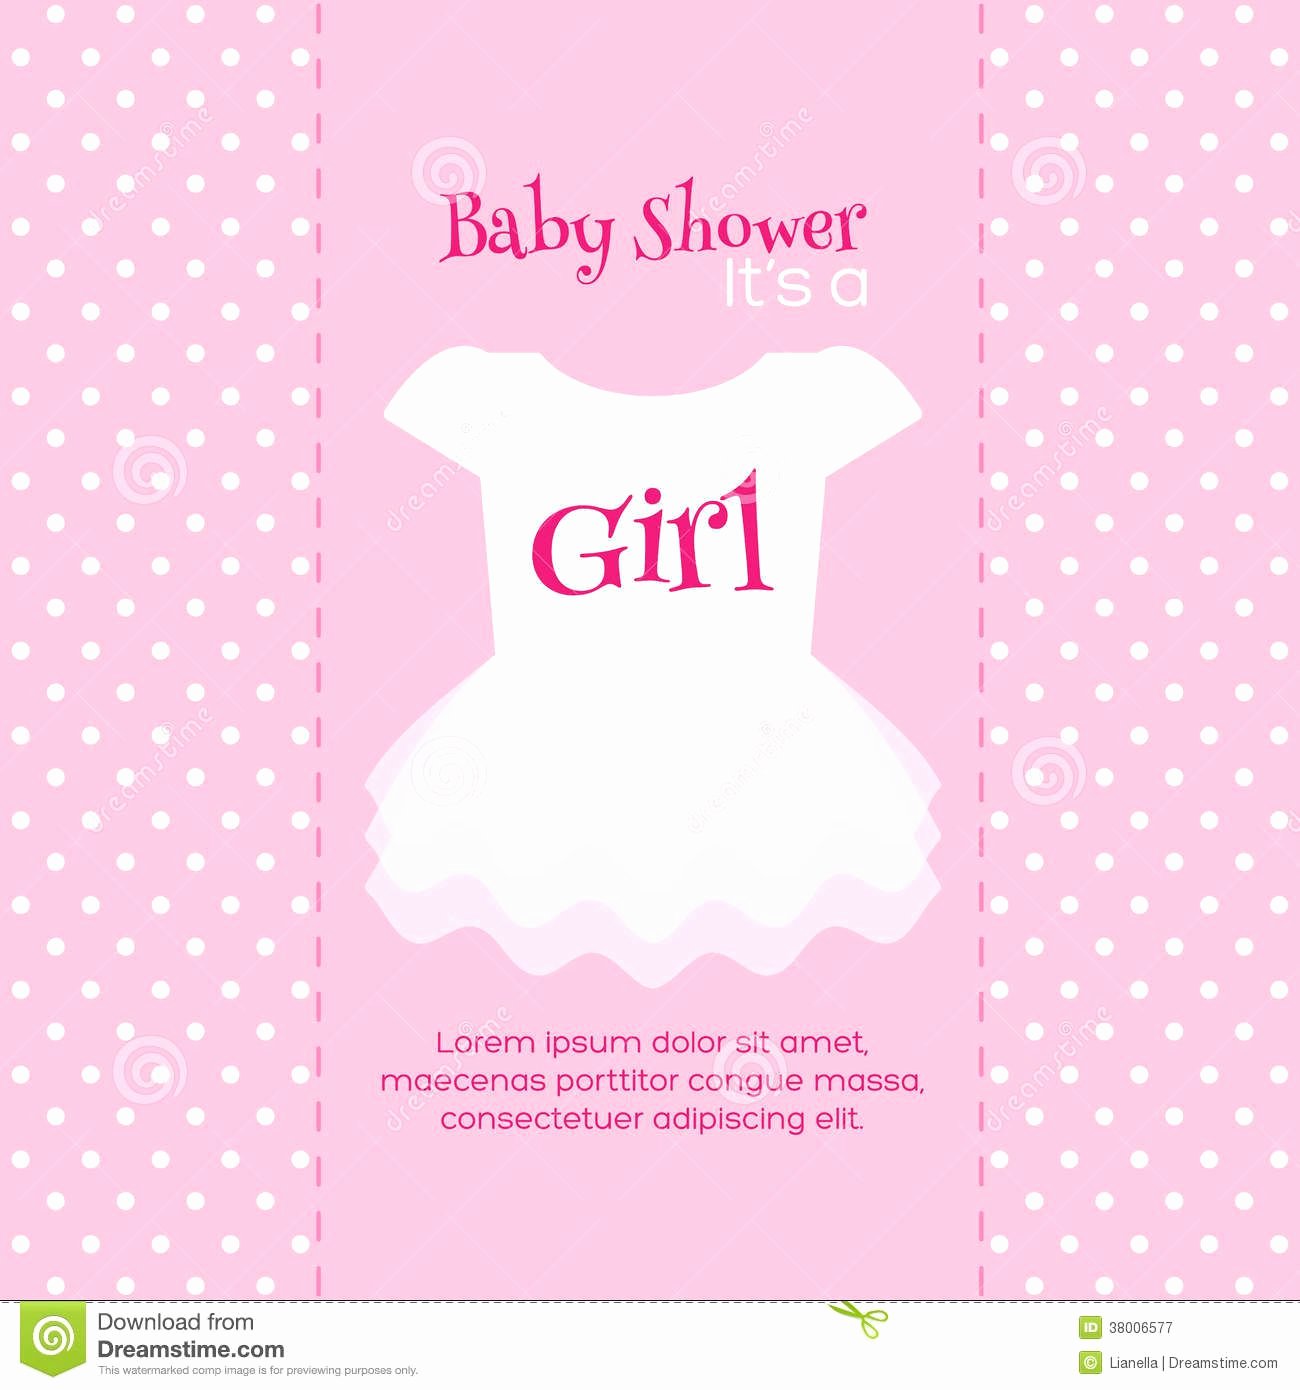 Baby Shower Invitations Cards Designs Free Baby Shower